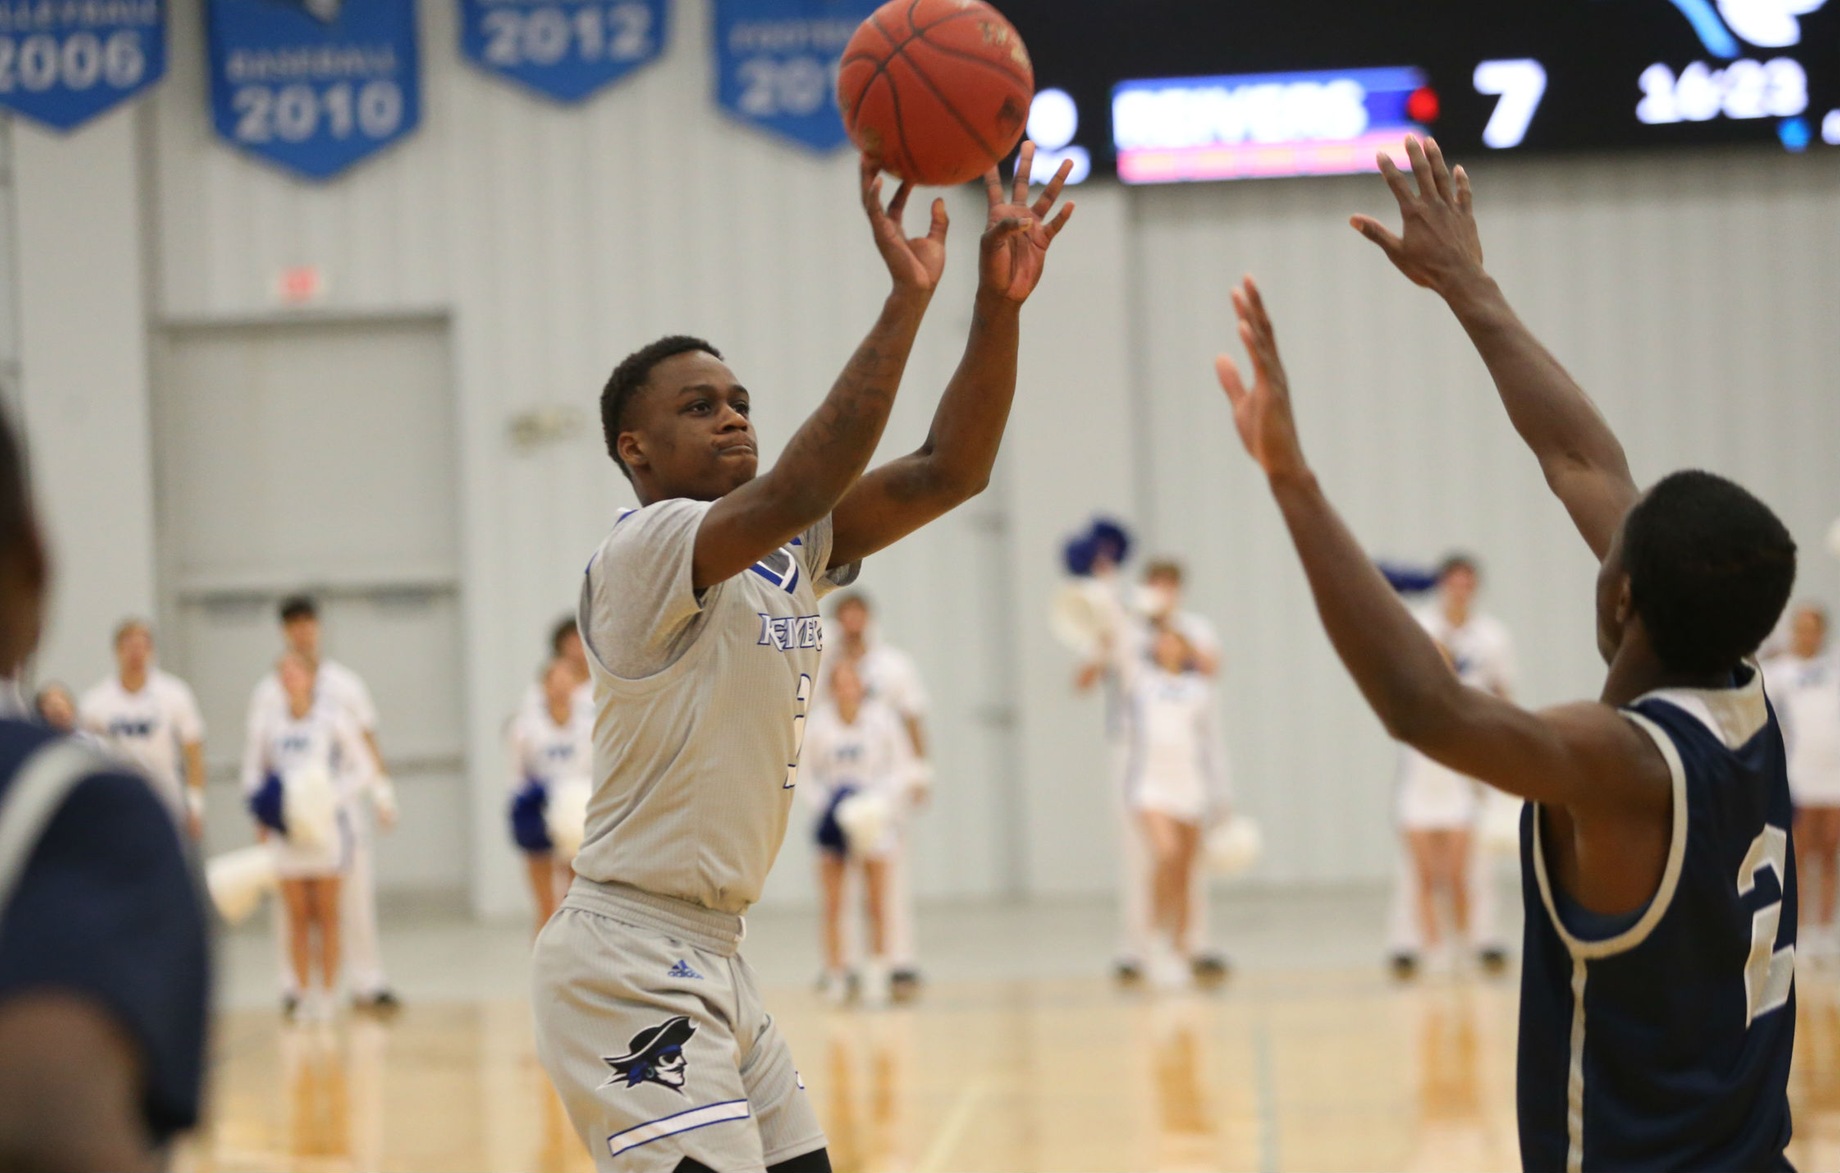 KT Thornton scored a career high 21 points to go along with his team high 6 assists as the Reivers, on the strength of a 62 point second half, once again collected a come-from-behind victory Tuesday (11/26) night.